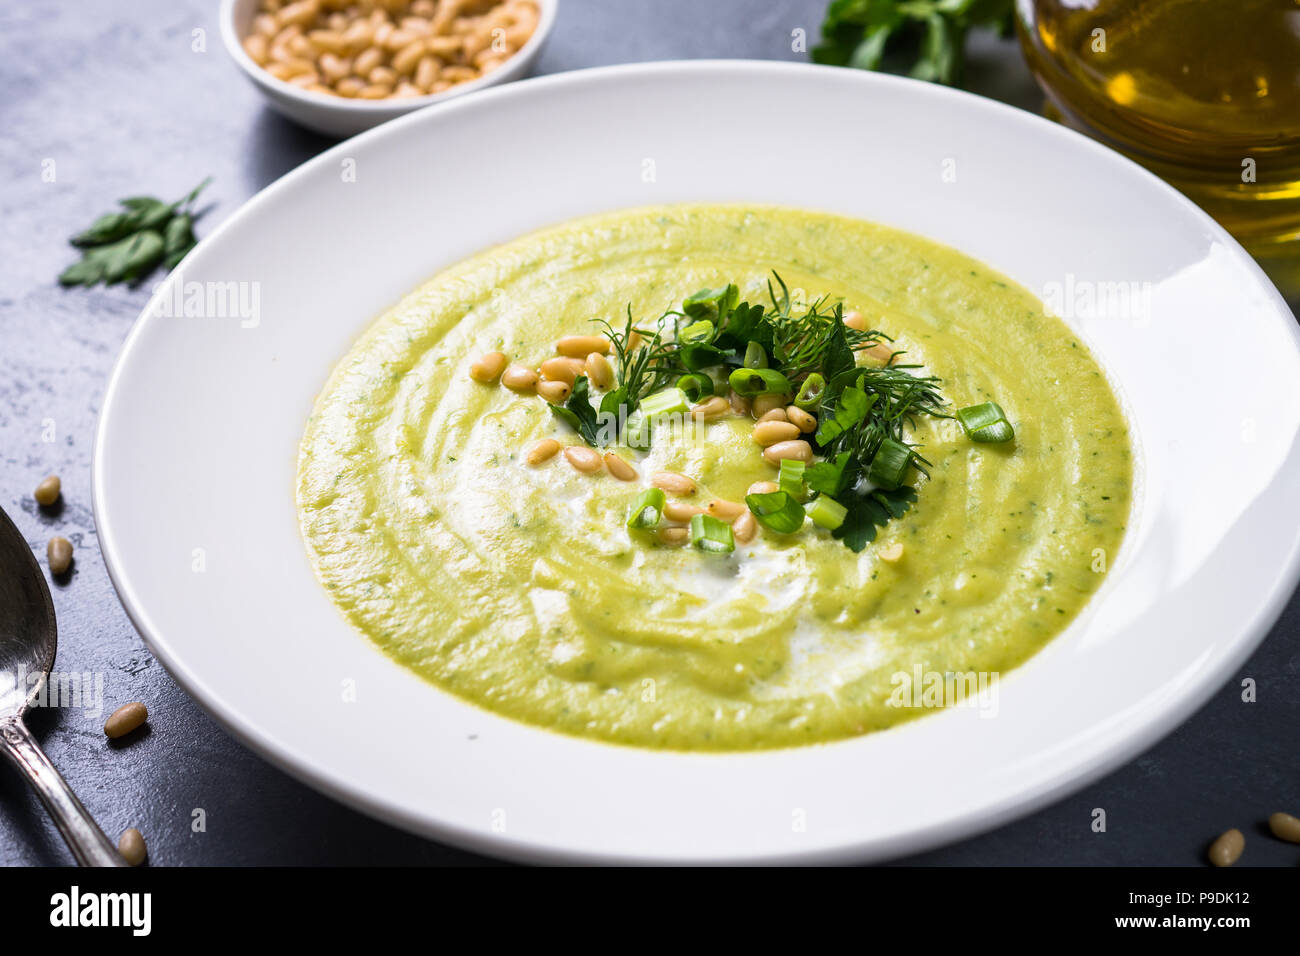 Cream soup with zucchini, herbs and cream.  Diet food, meatless dish. Stock Photo